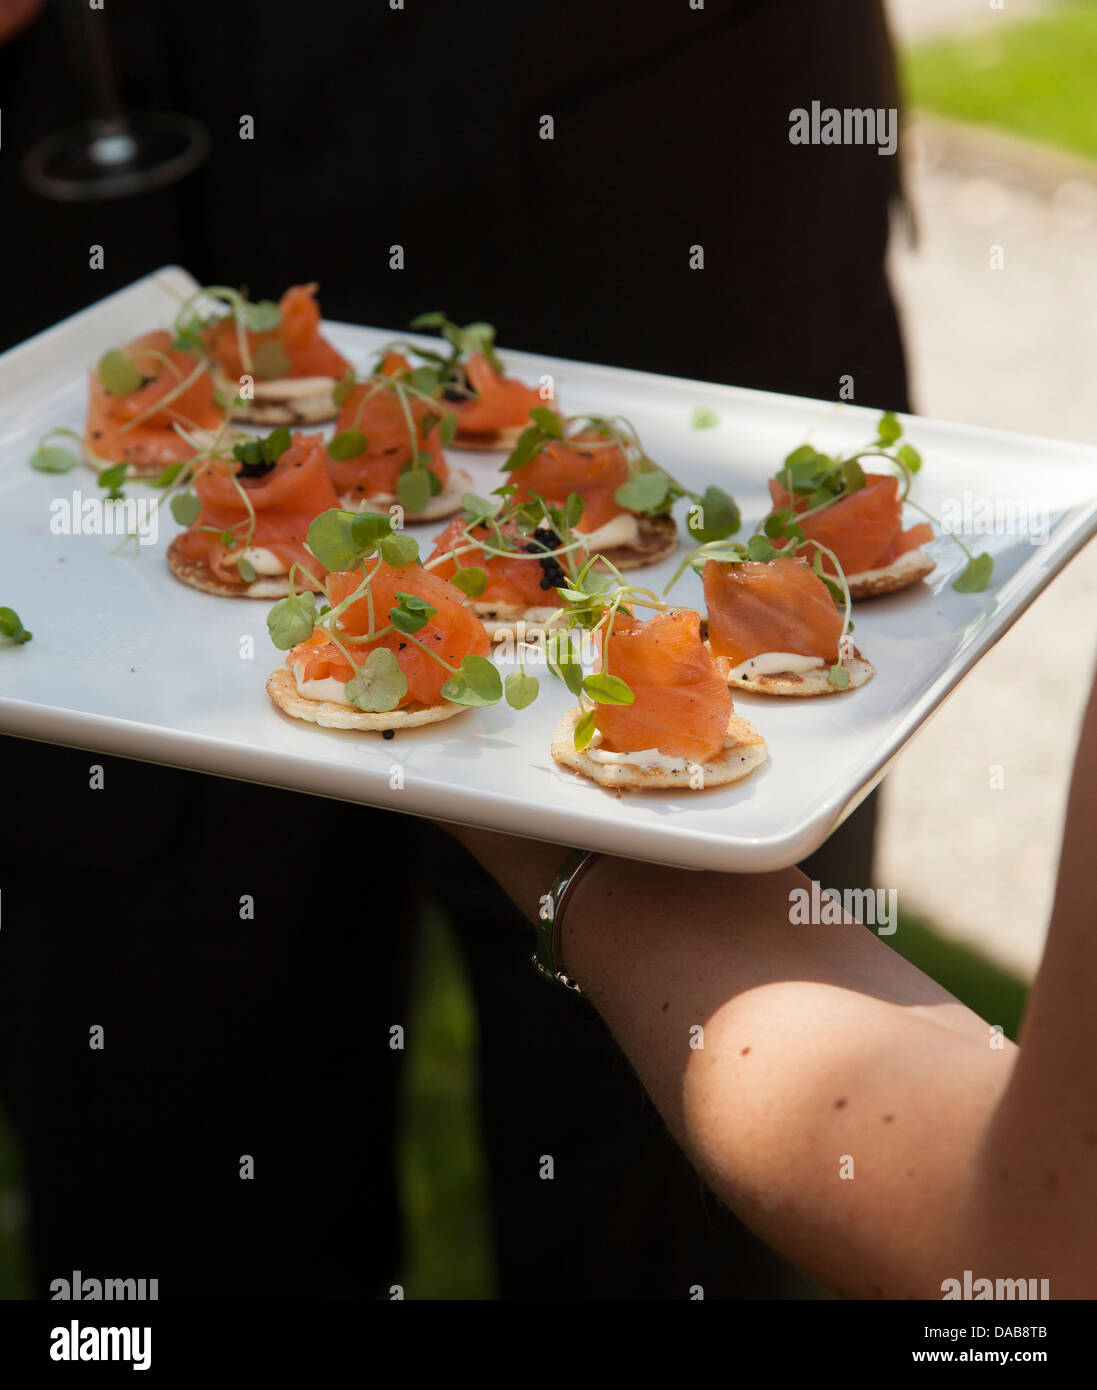 Canapés served on a tray Stock Photo